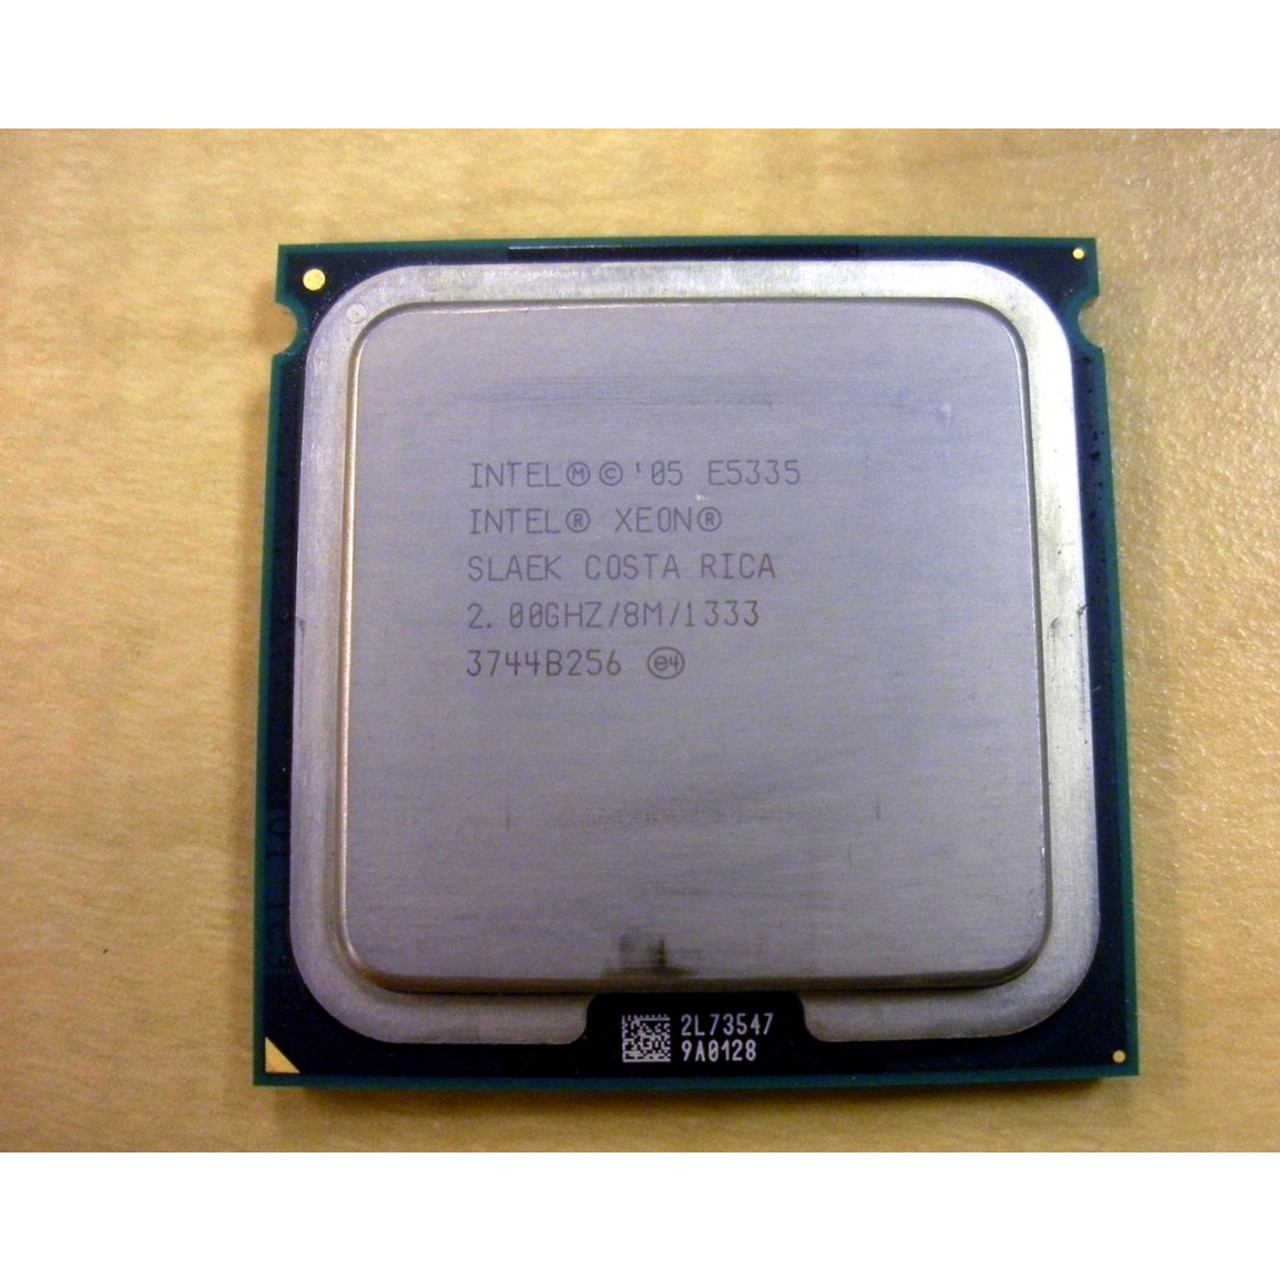 Intel Xeon W3530 Slbkr 2 8ghz Quad Core Processor Computers Tablets Networking Cpus Processors